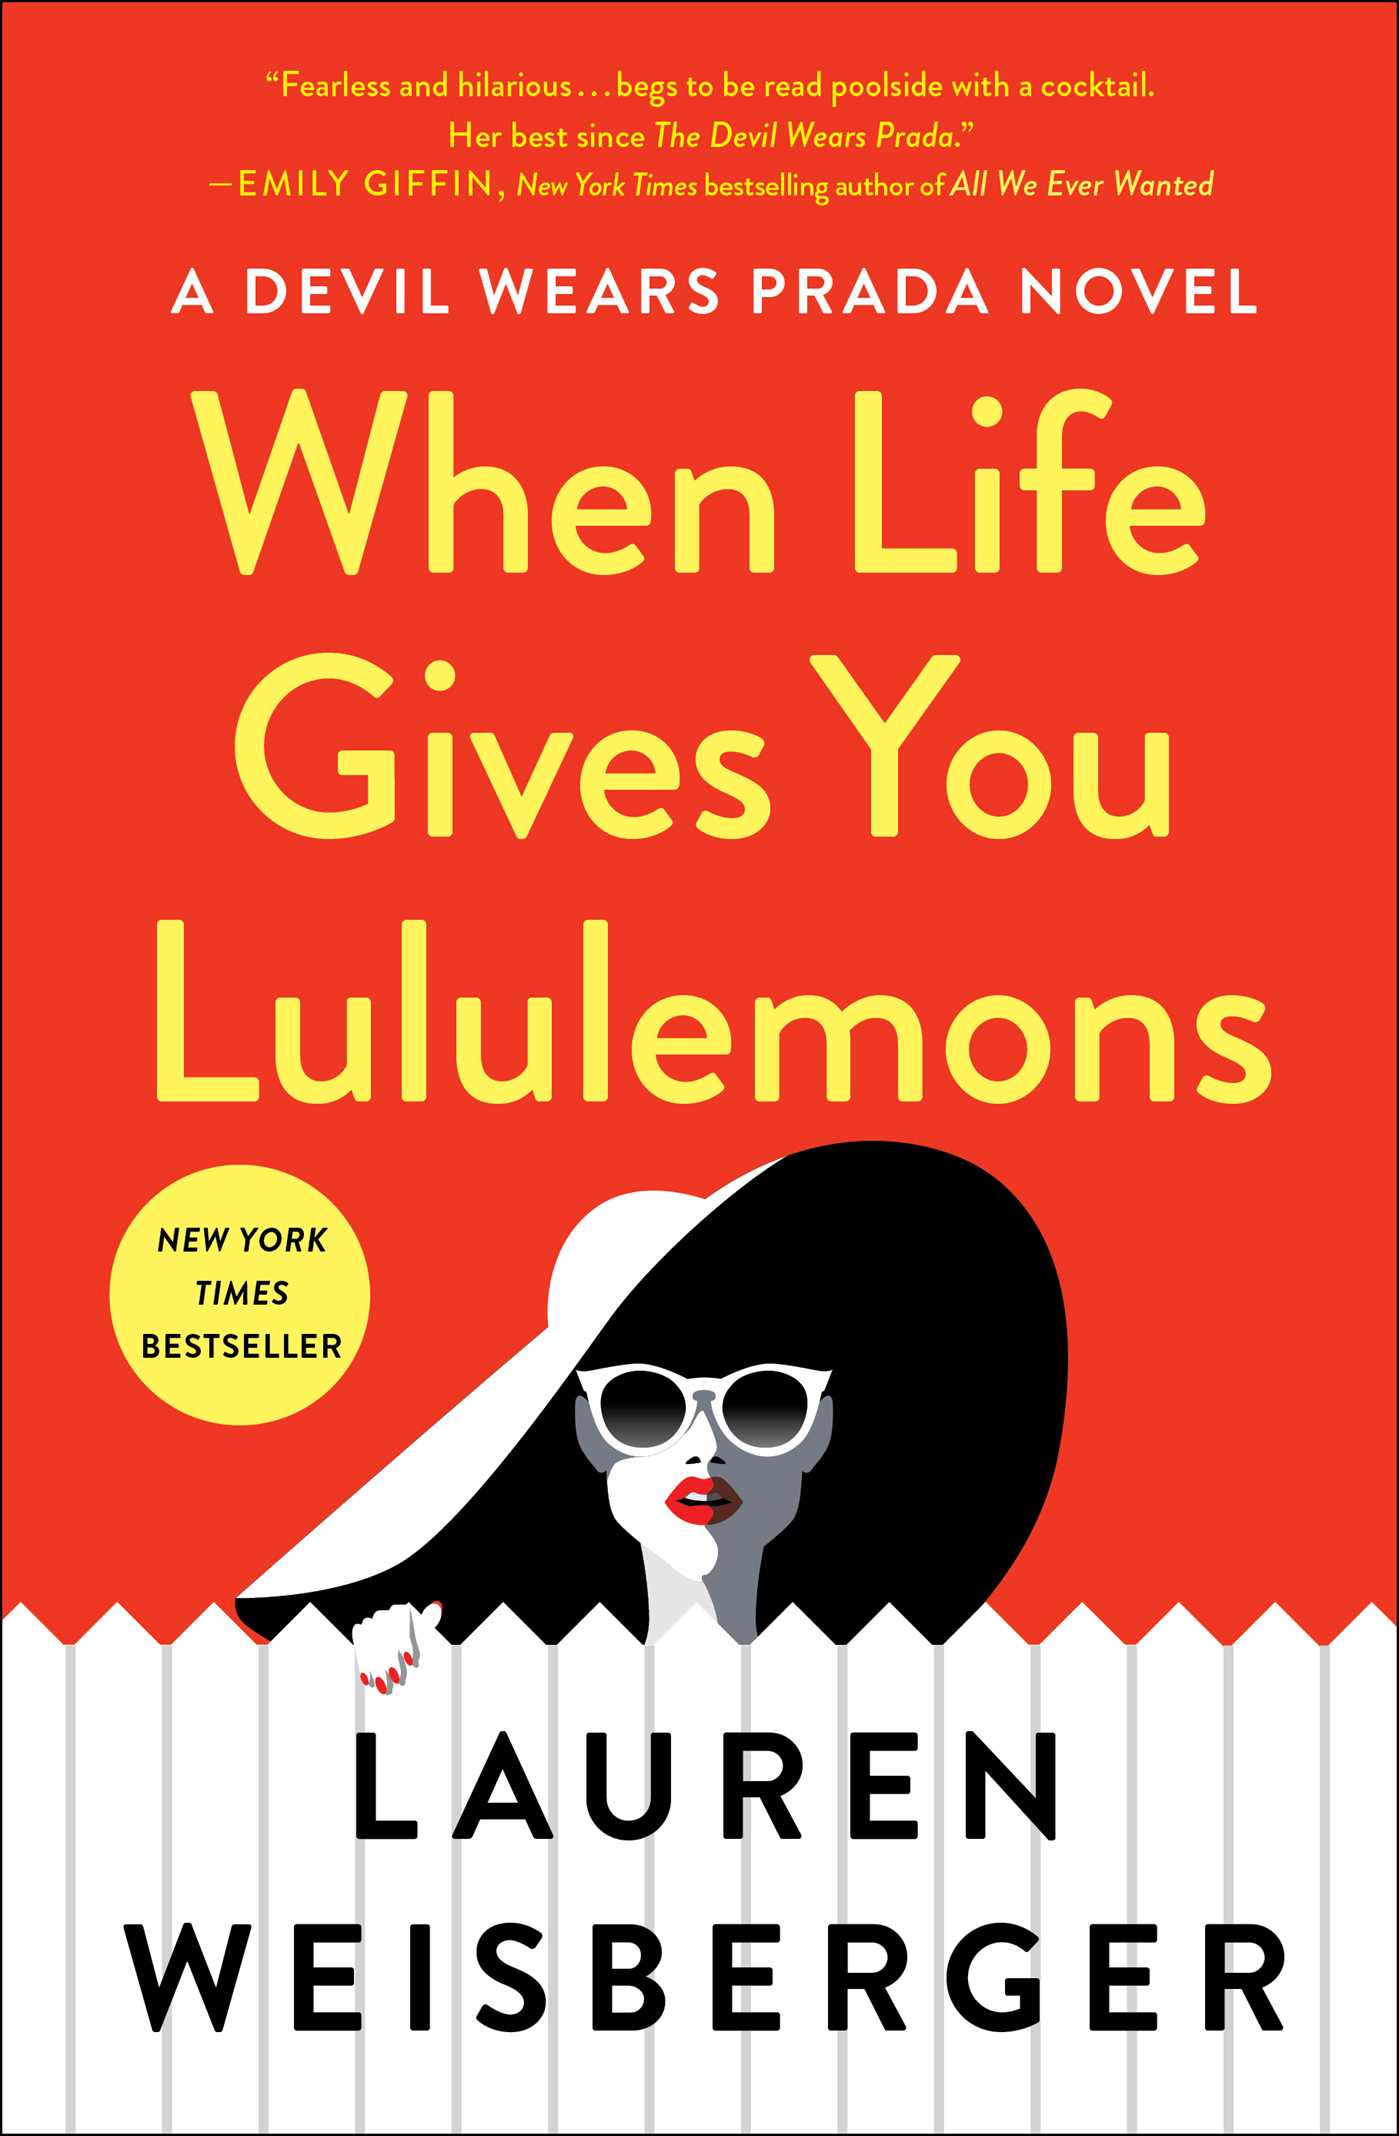 When Life Gives You Lululemons | Book by Lauren Weisberger ...